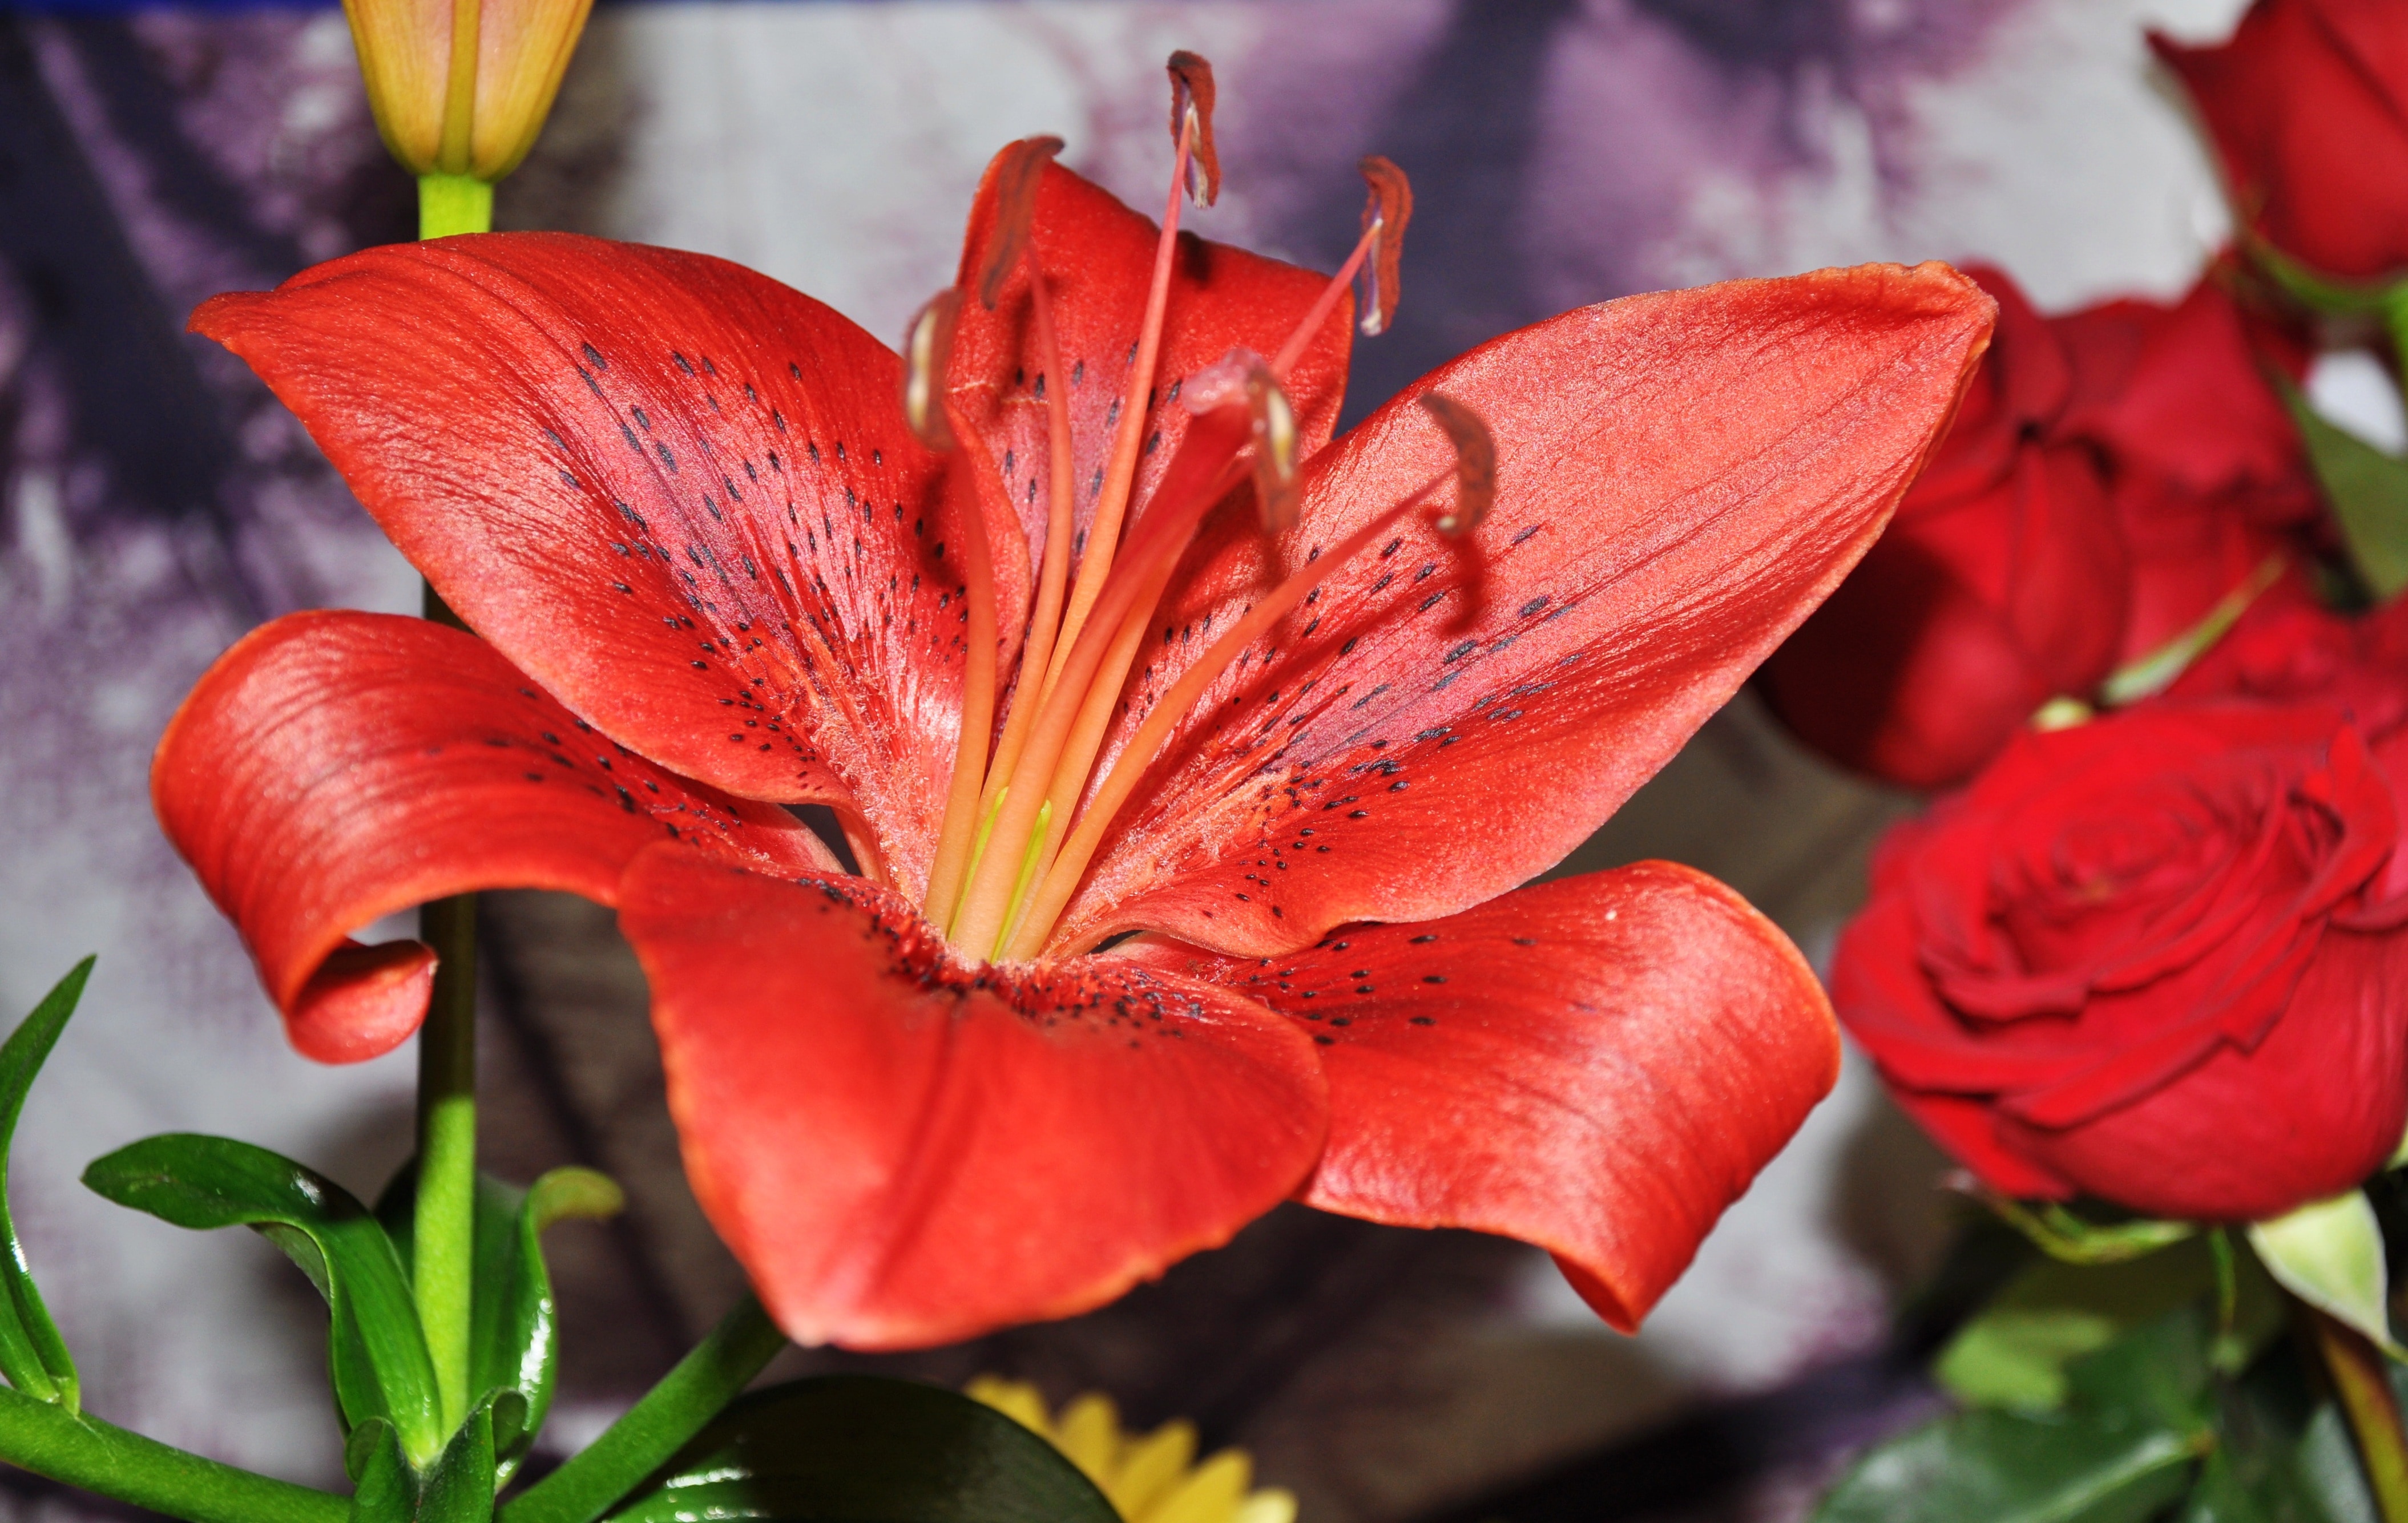 Flower, Lily, Red, flower, close-up